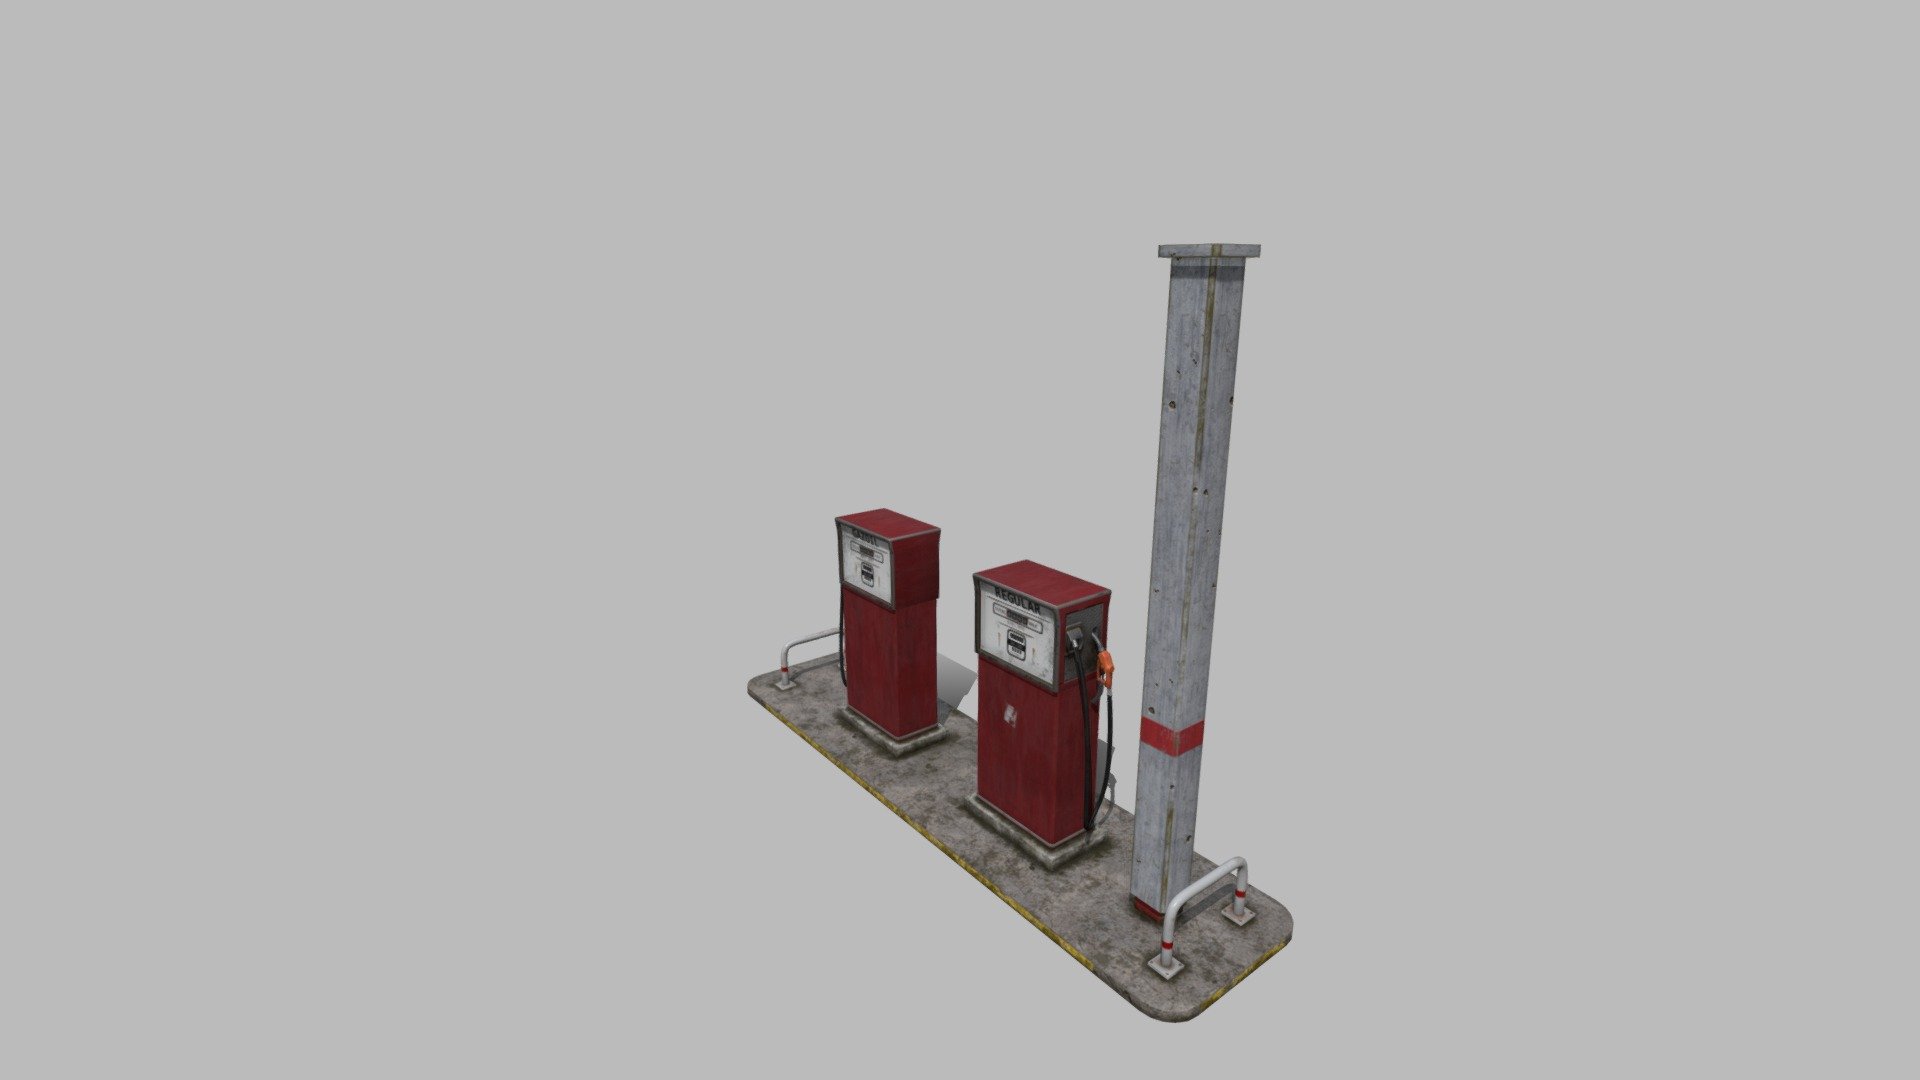 I share this fuel pump with you, it is part of a service station pack on unreal engine 3d model